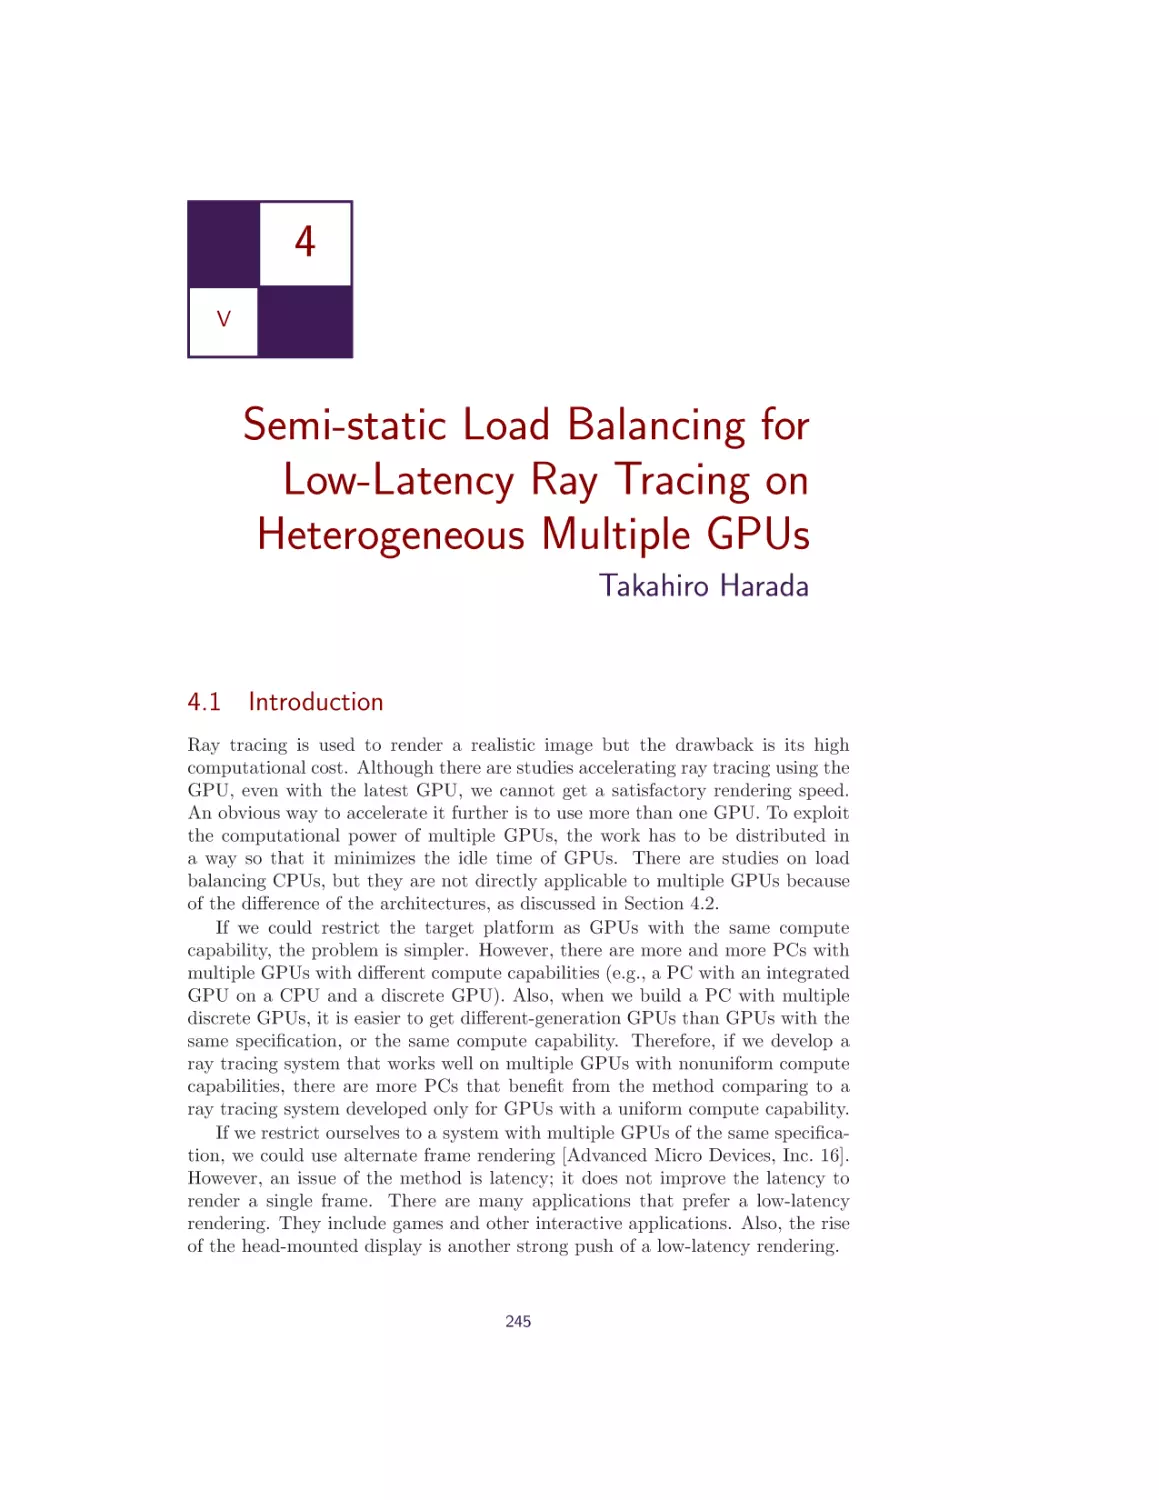 4. Semi-static Load Balancing for Low-Latency Ray Tracing on Heterogeneous Multiple GPUs